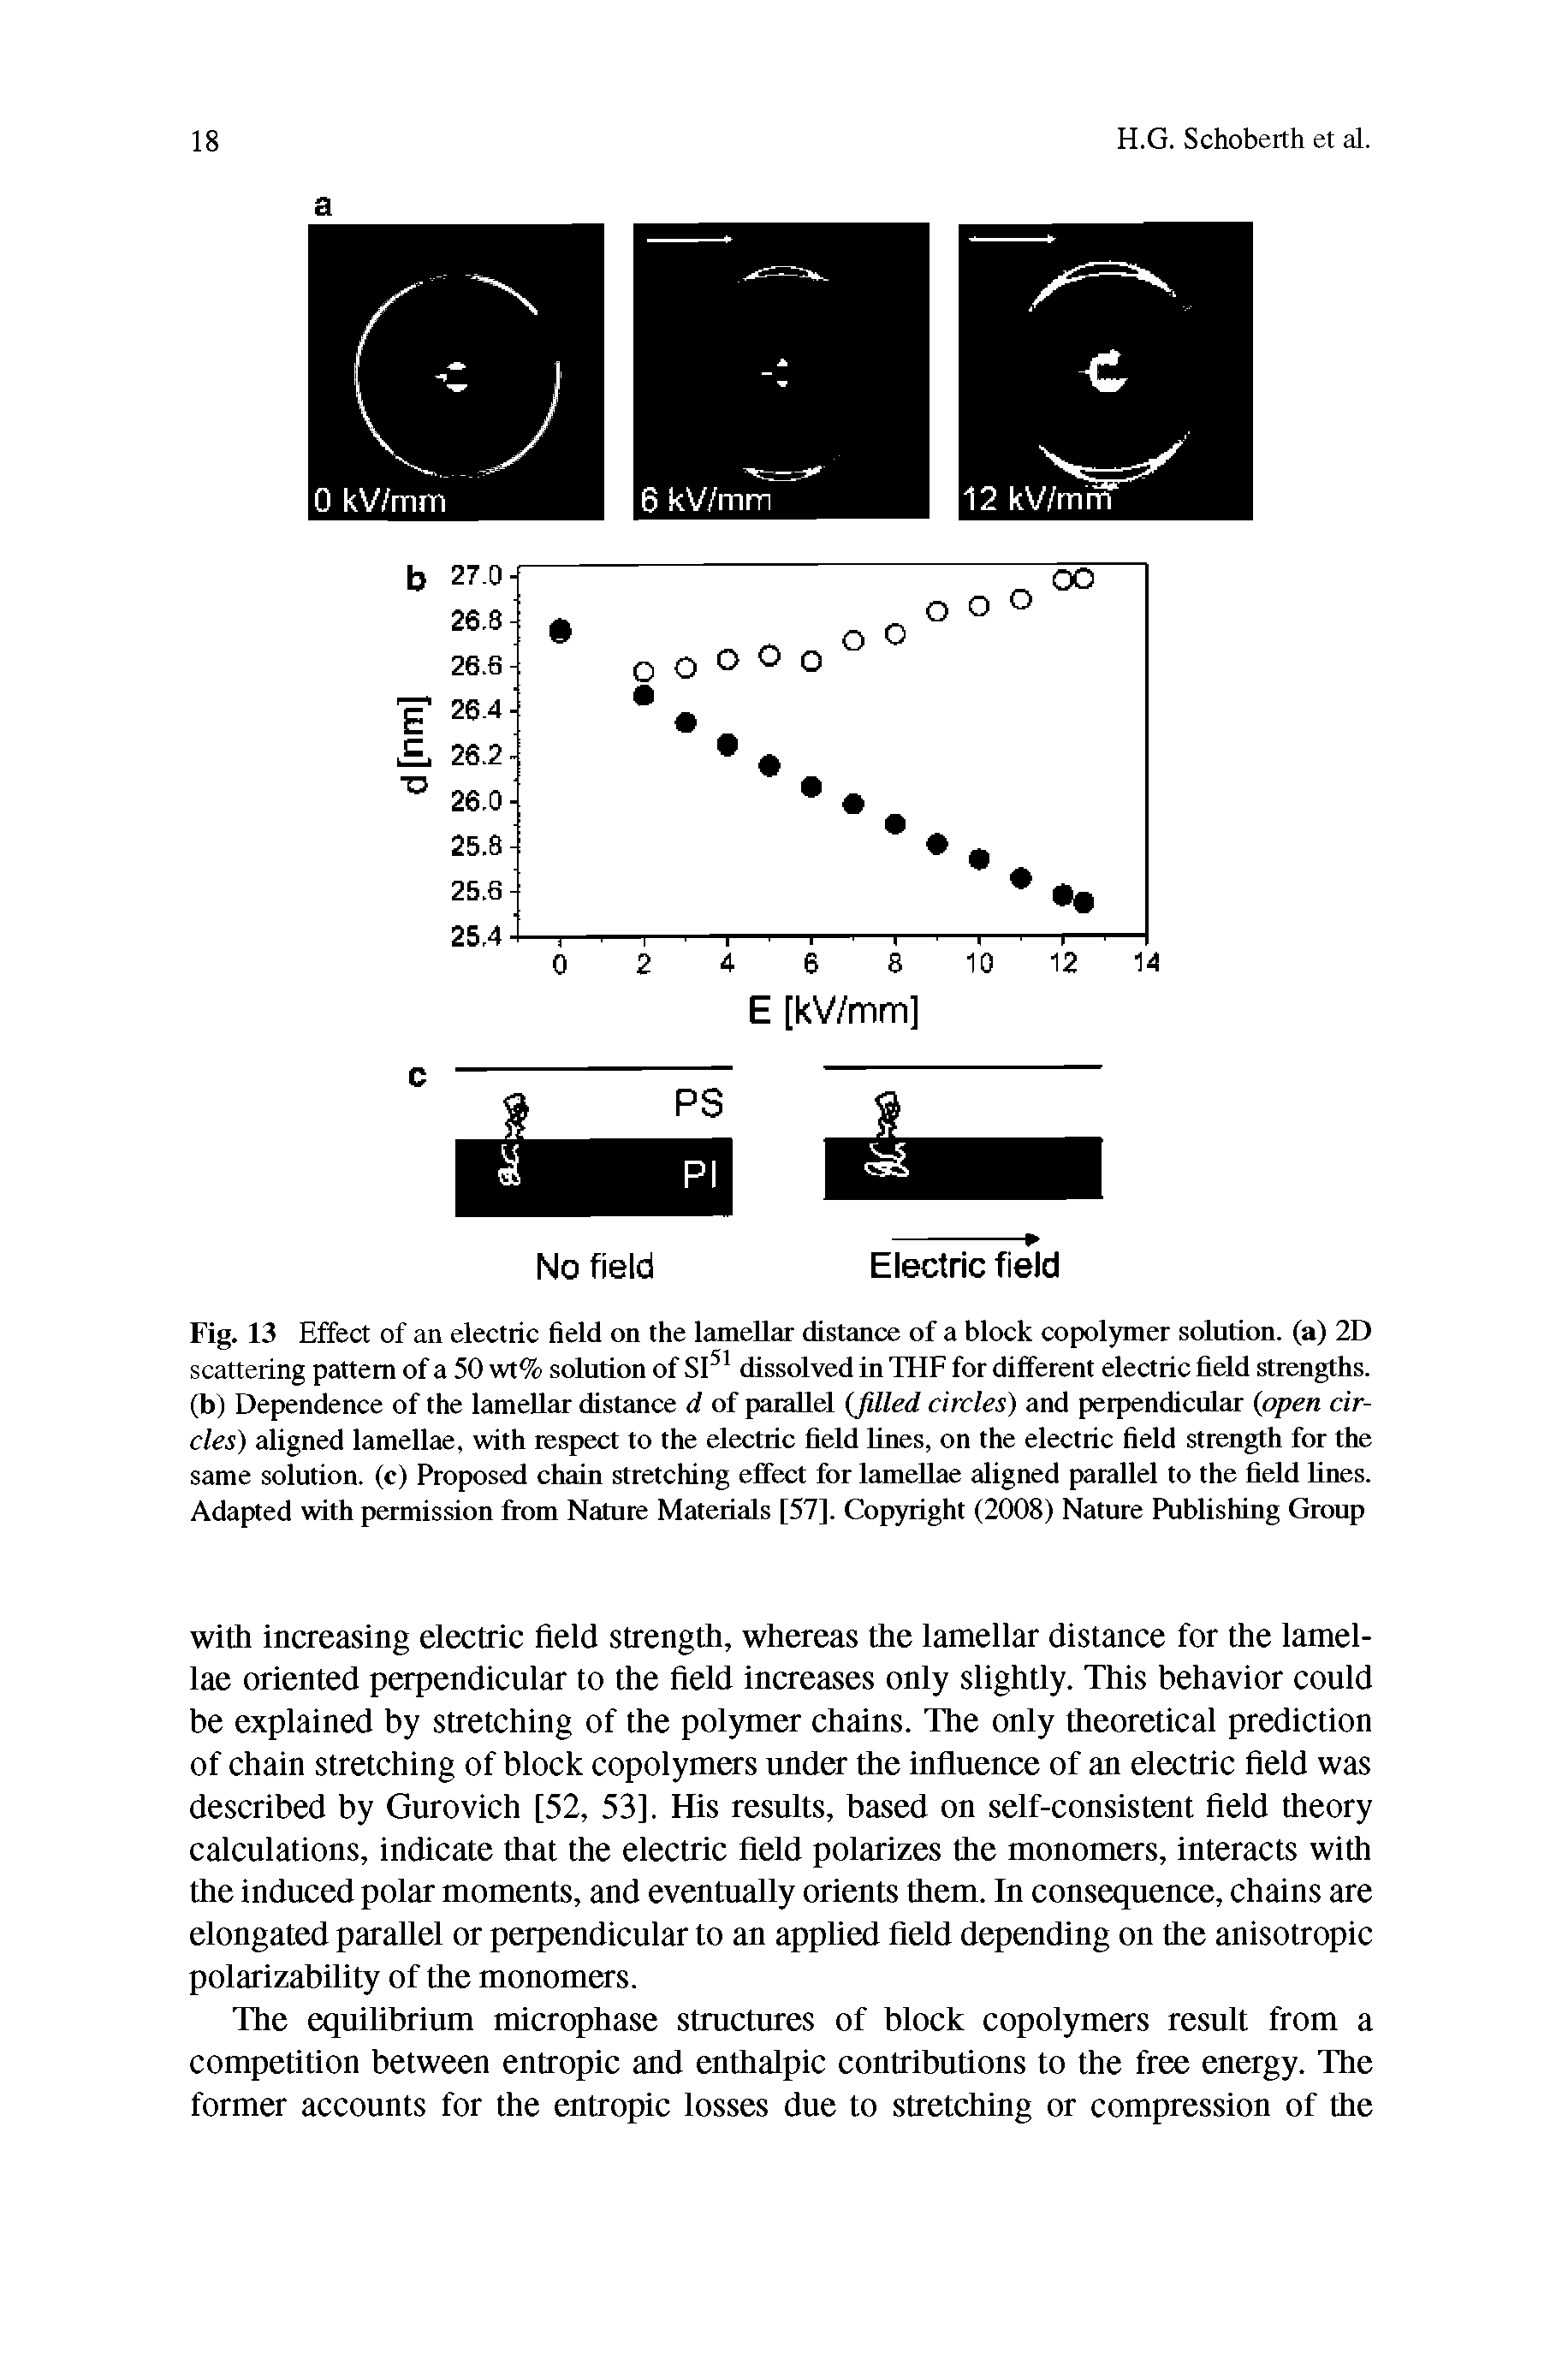 Fig. 13 Effect of an electric field on the lamellar distance of a block copolymer solution, (a) 2D scattering pattern of a 50 wt% solution of SI51 dissolved in THF for different electric field strengths, (b) Dependence of the lamellar distance d of parallel (filled circles) and perpendicular (open circles) aligned lamellae, with respect to the electric field lines, on the electric field strength for the same solution, (c) Proposed chain stretching effect for lamellae aligned parallel to the field lines. Adapted with permission from Nature Materials [57]. Copyright (2008) Nature Publishing Group...